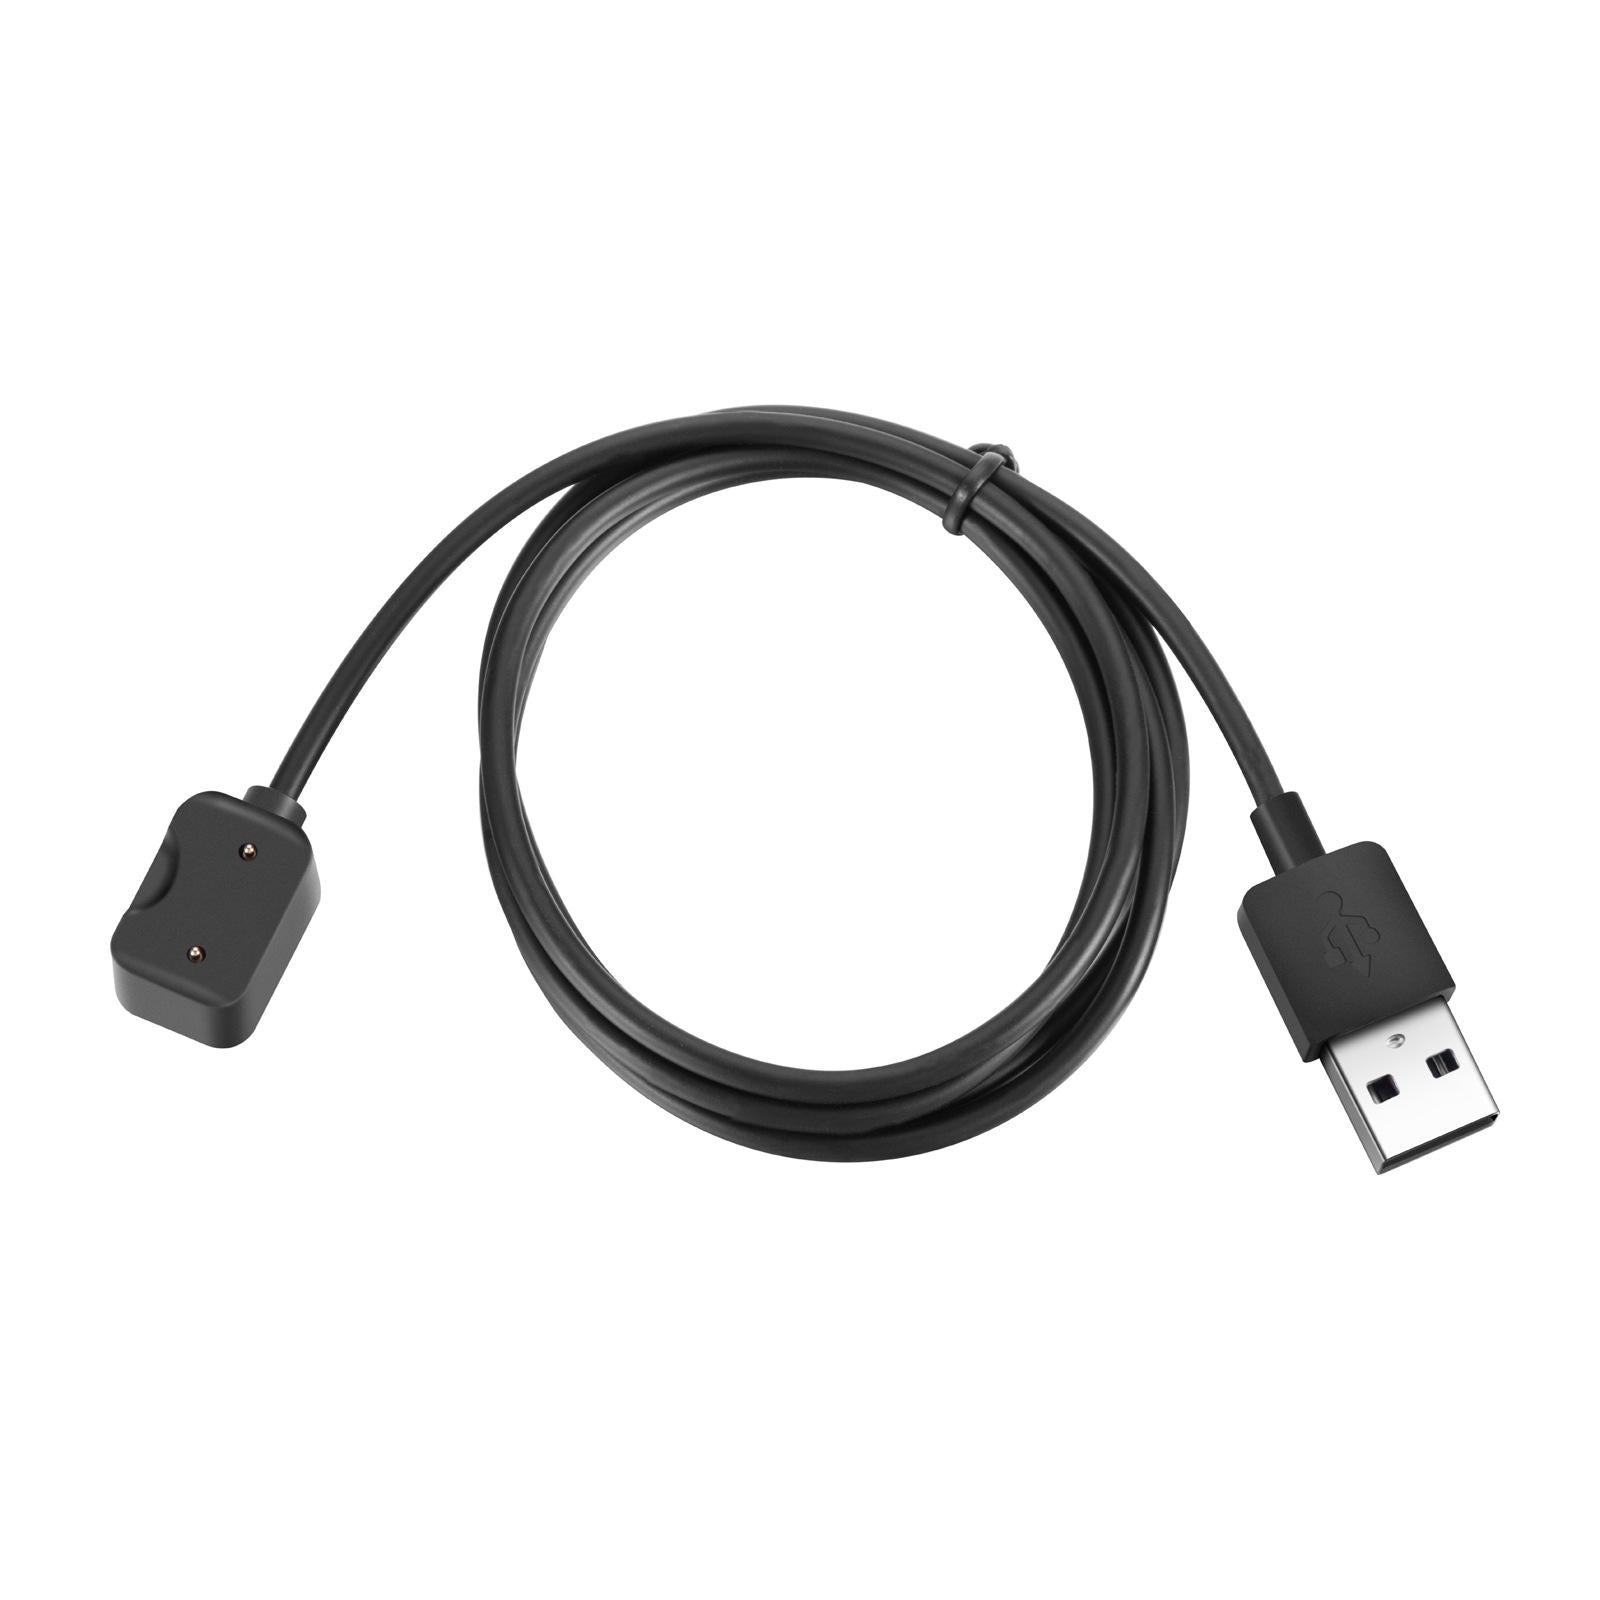 Bakeey 1 Meter Magnetic Charger Cable Watch Cable for Amazfit Cor MiDong Smart Watch